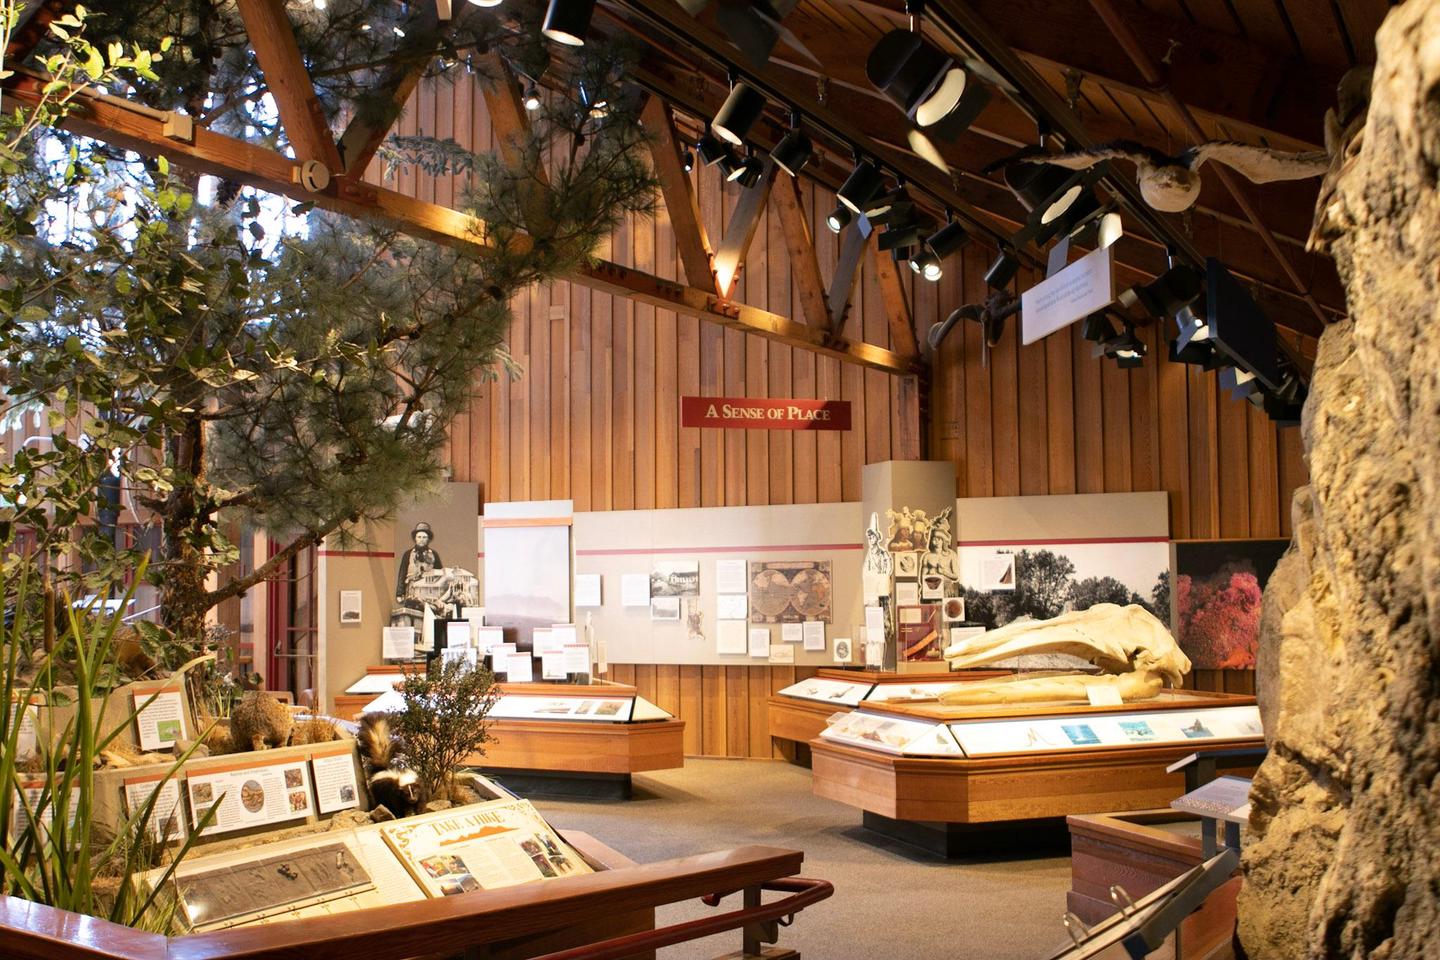 Bear Valley Visitor Center ExhibitsLearn about the thousands of years of human history at Point Reyes.